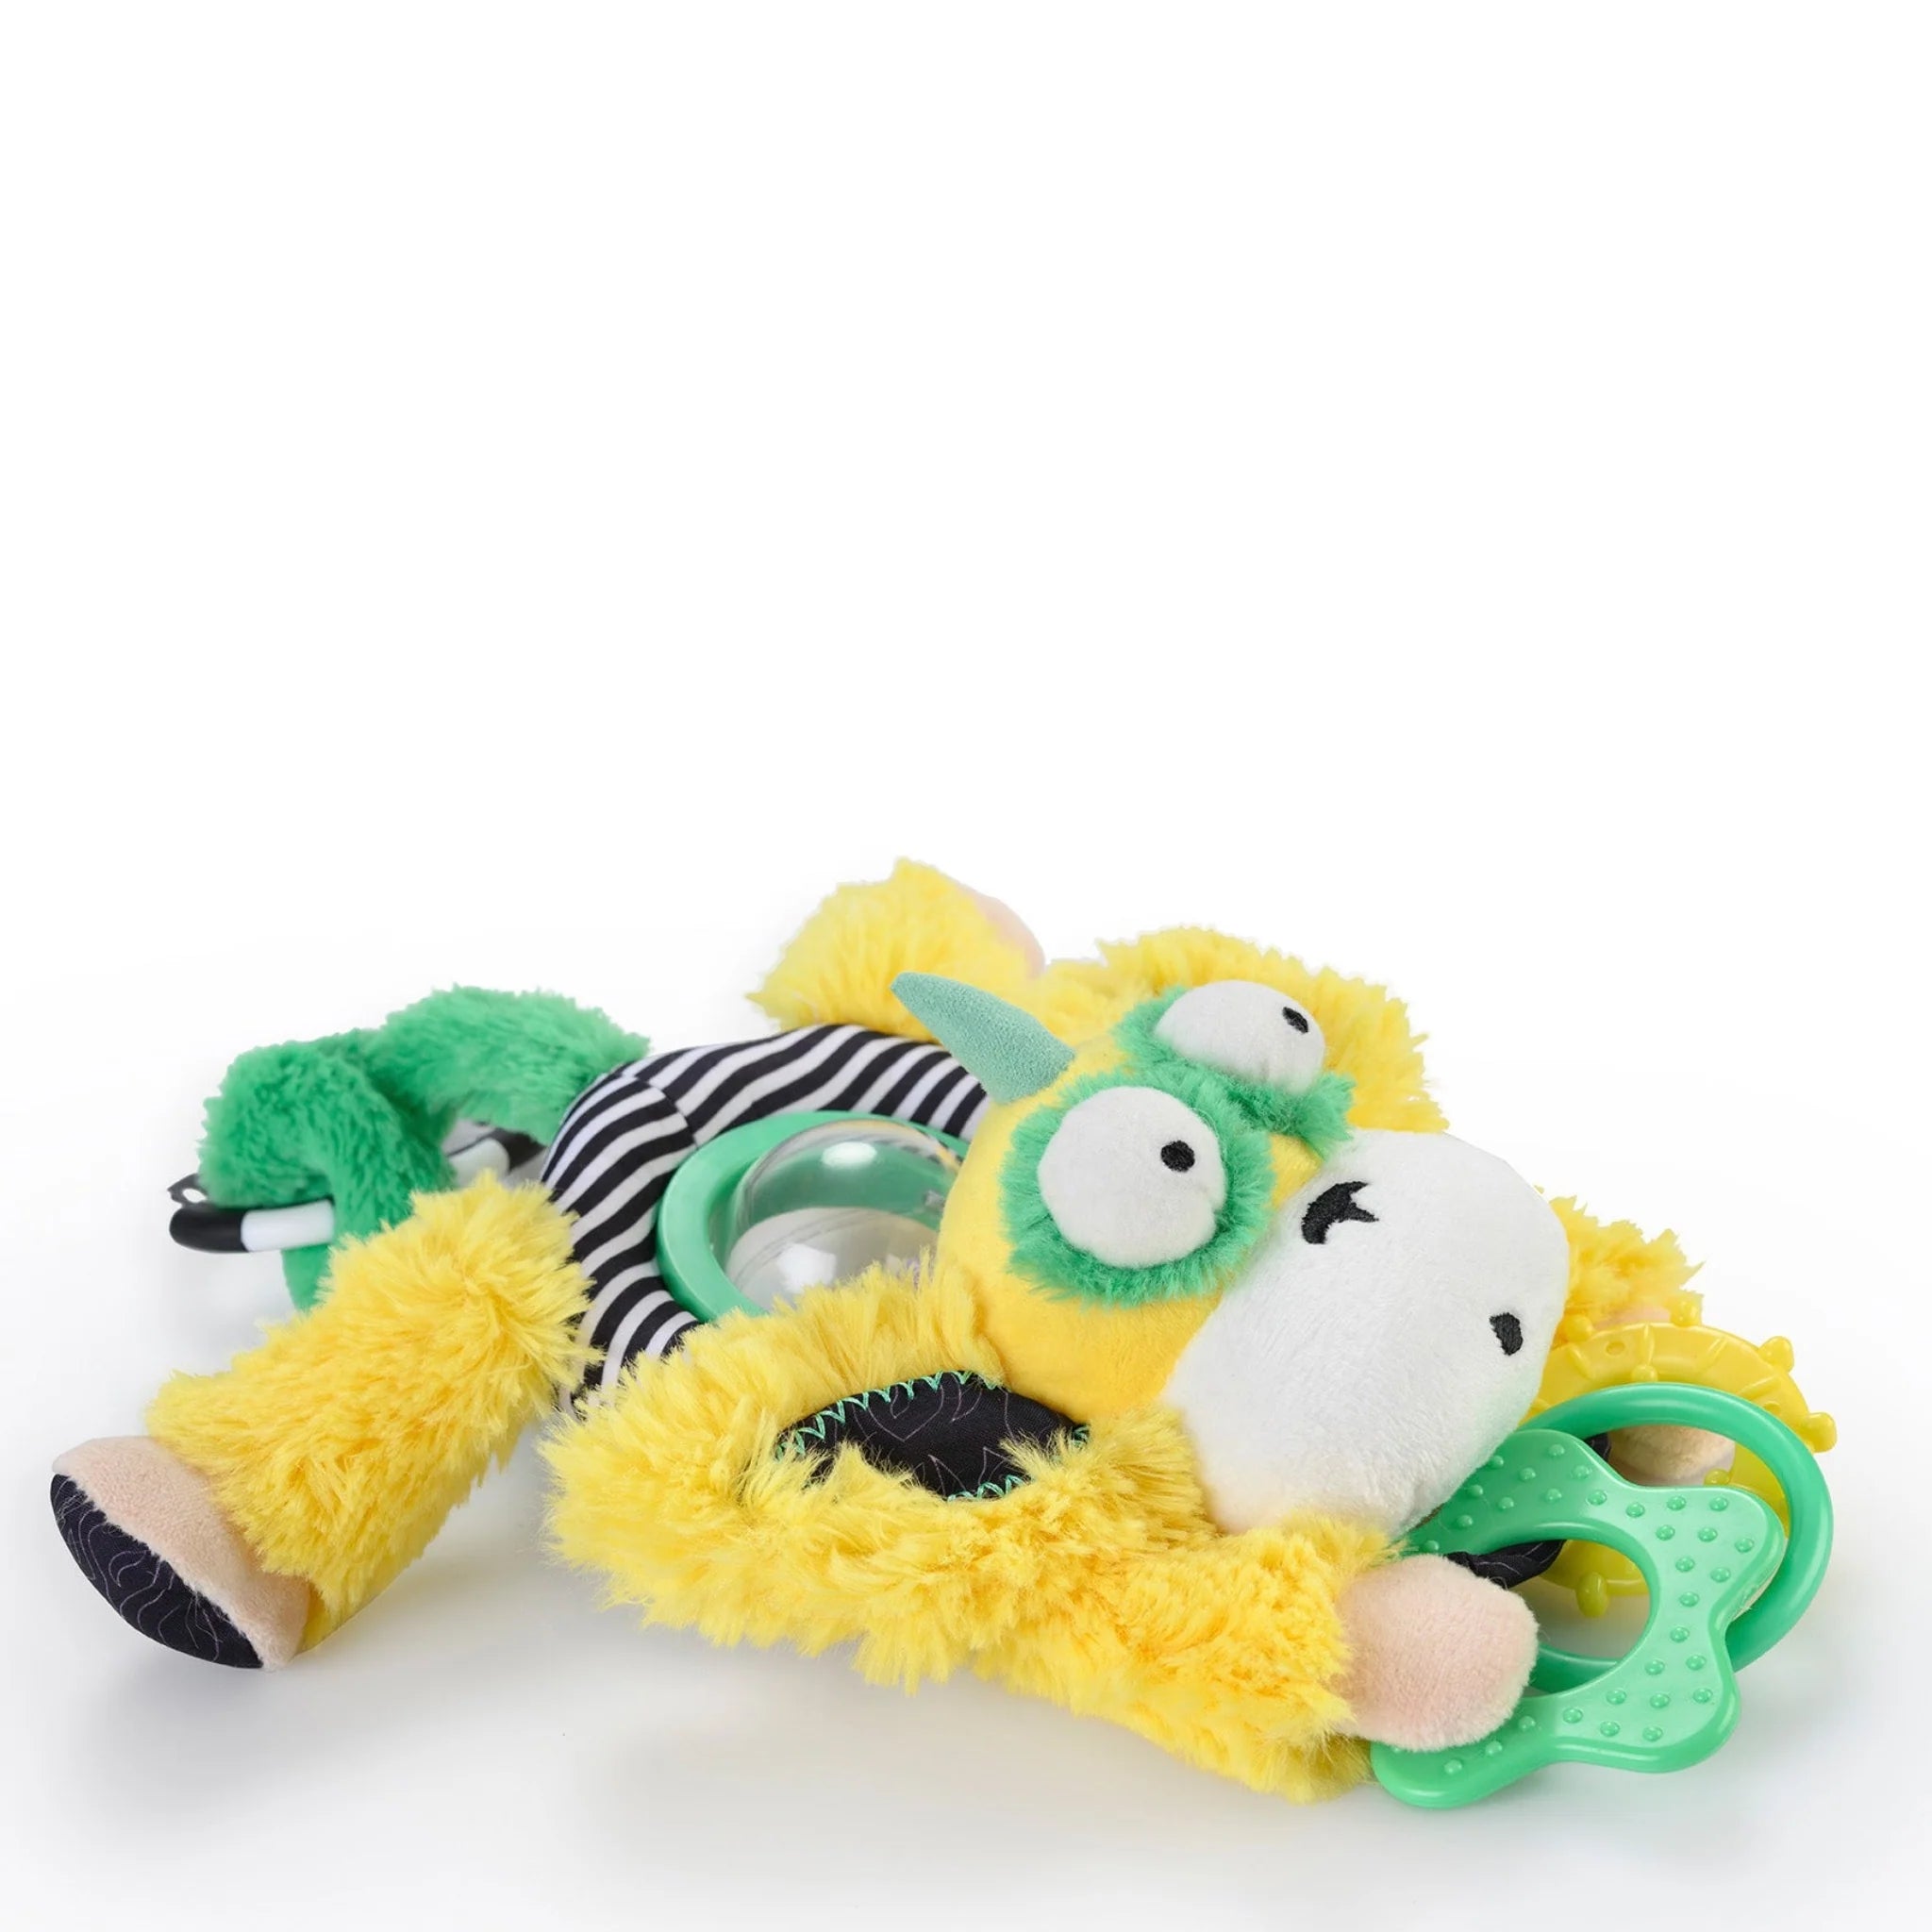 Marley the Horn Headed Monkey Spin Belly Hanging Activity Toy - Twinkle Twinkle Little One